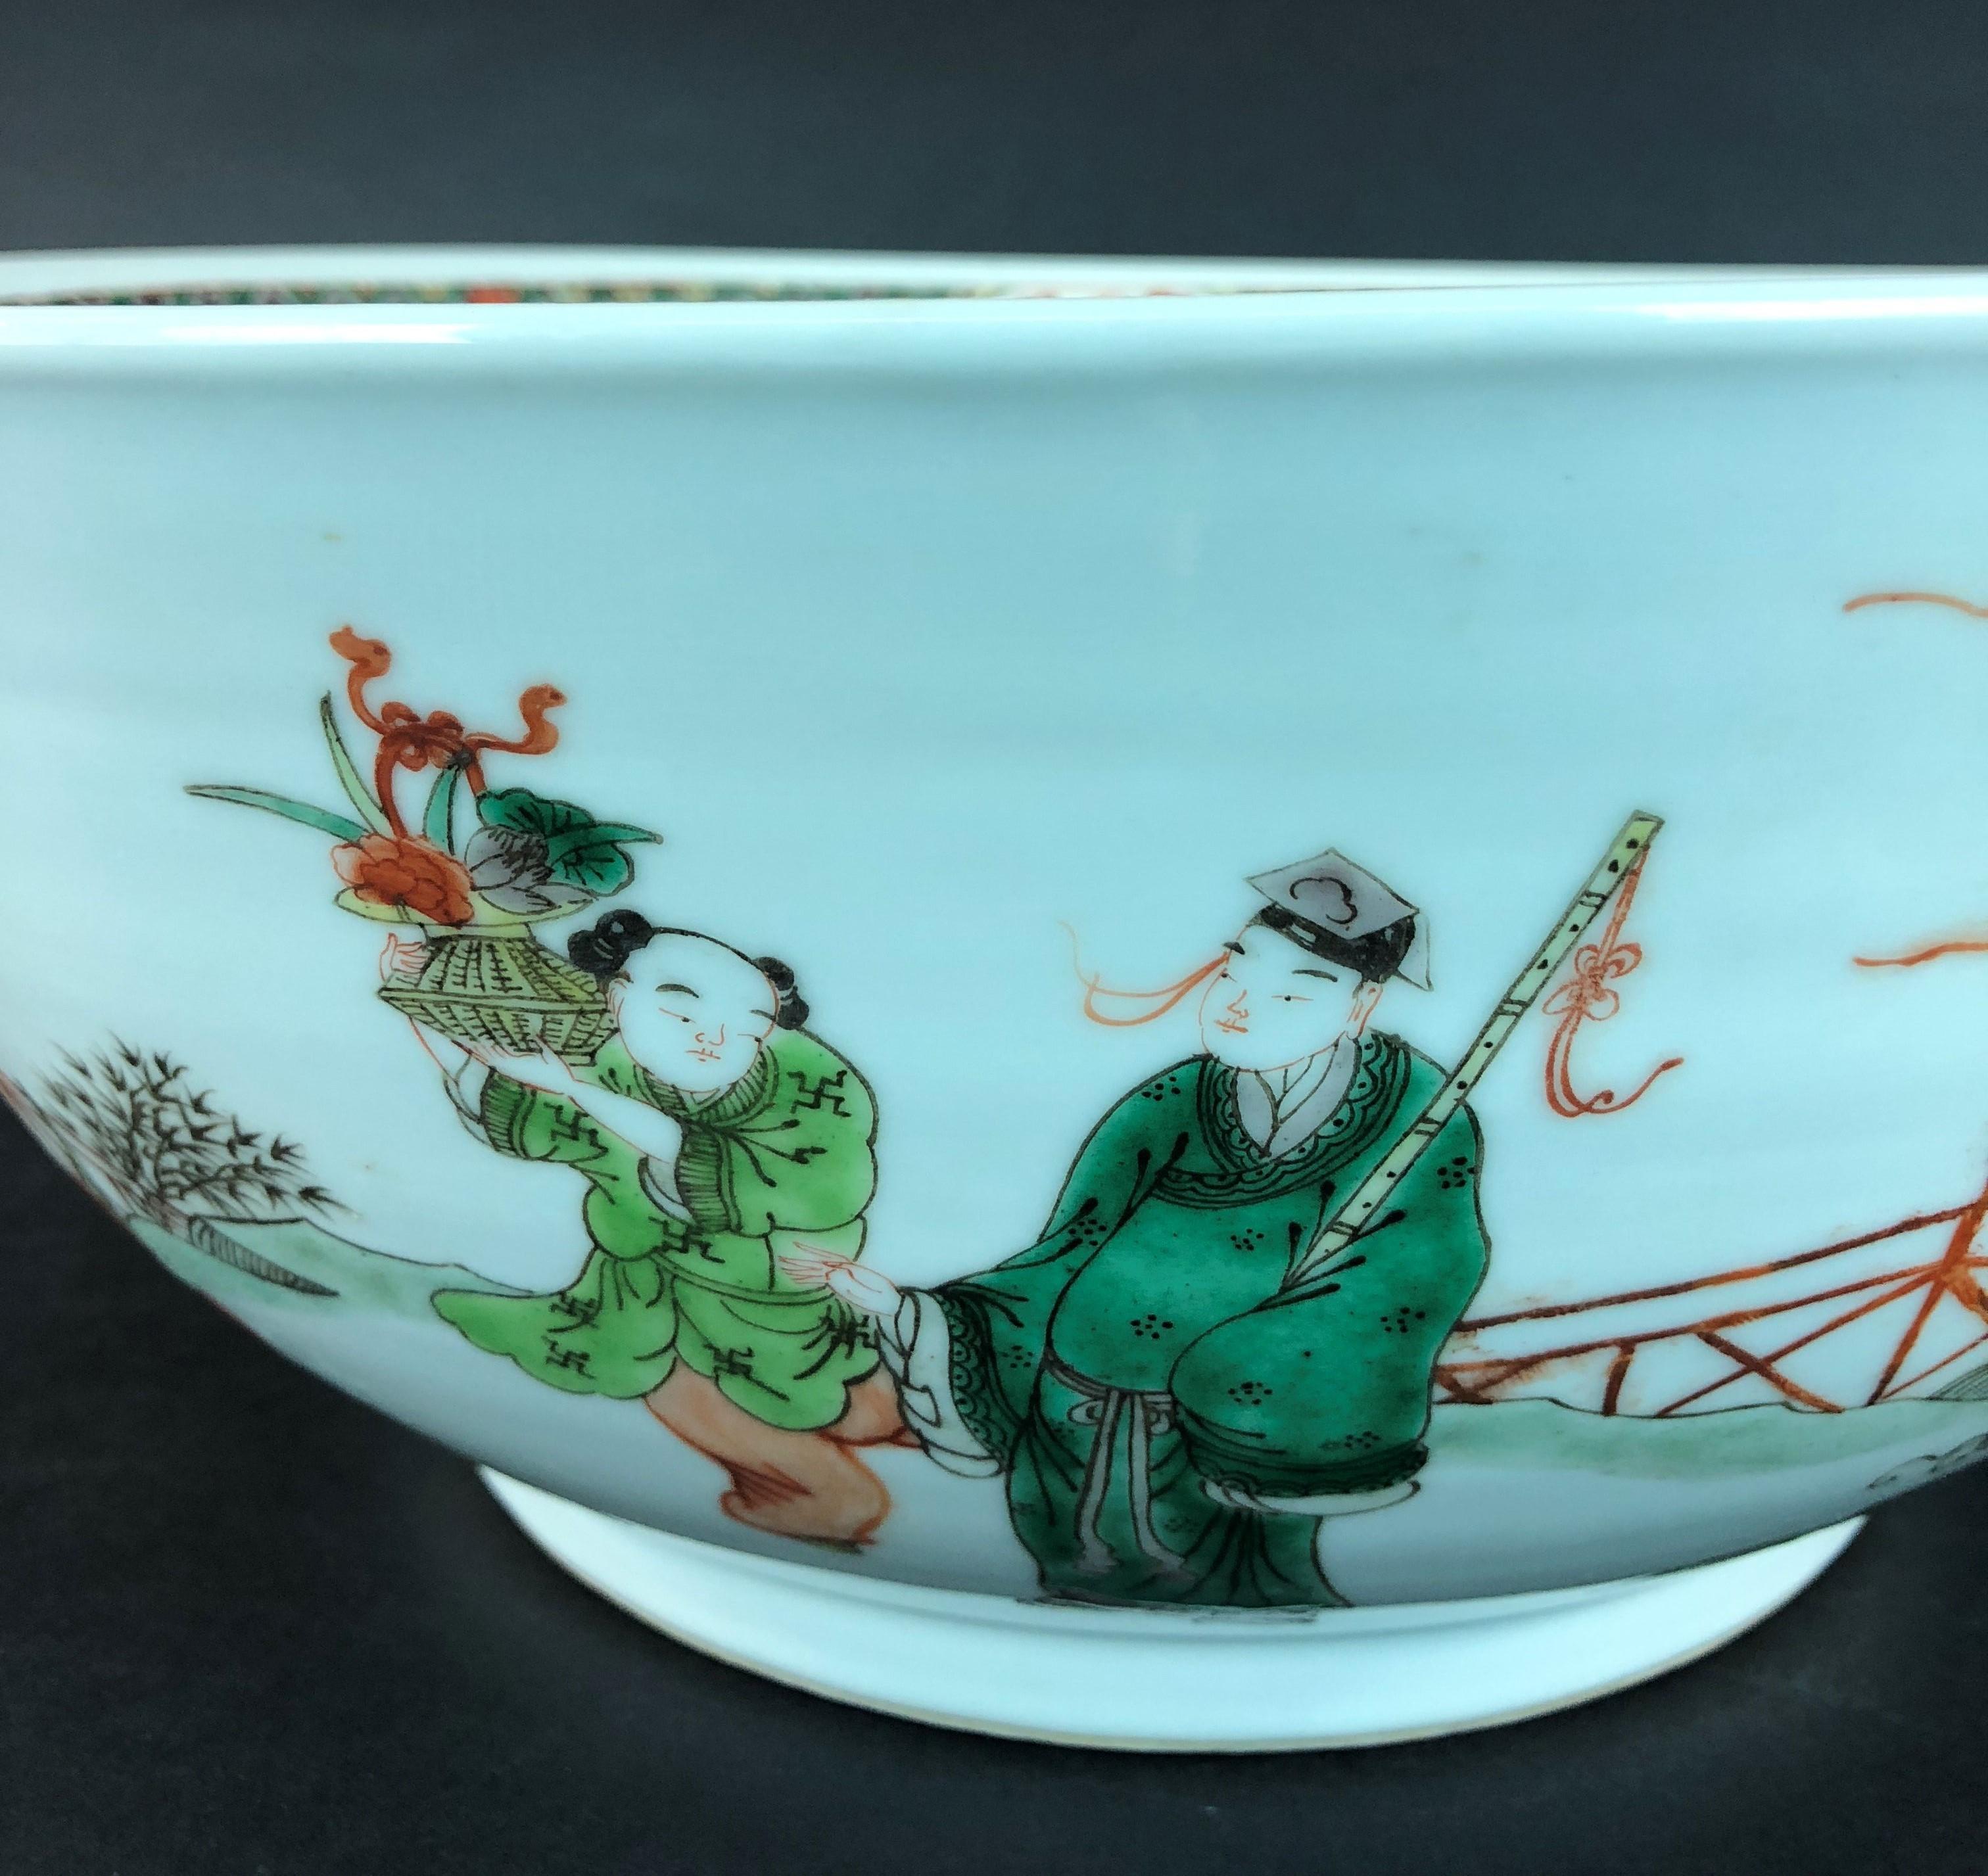 Unmarked Antique Asian Japanese Bowl